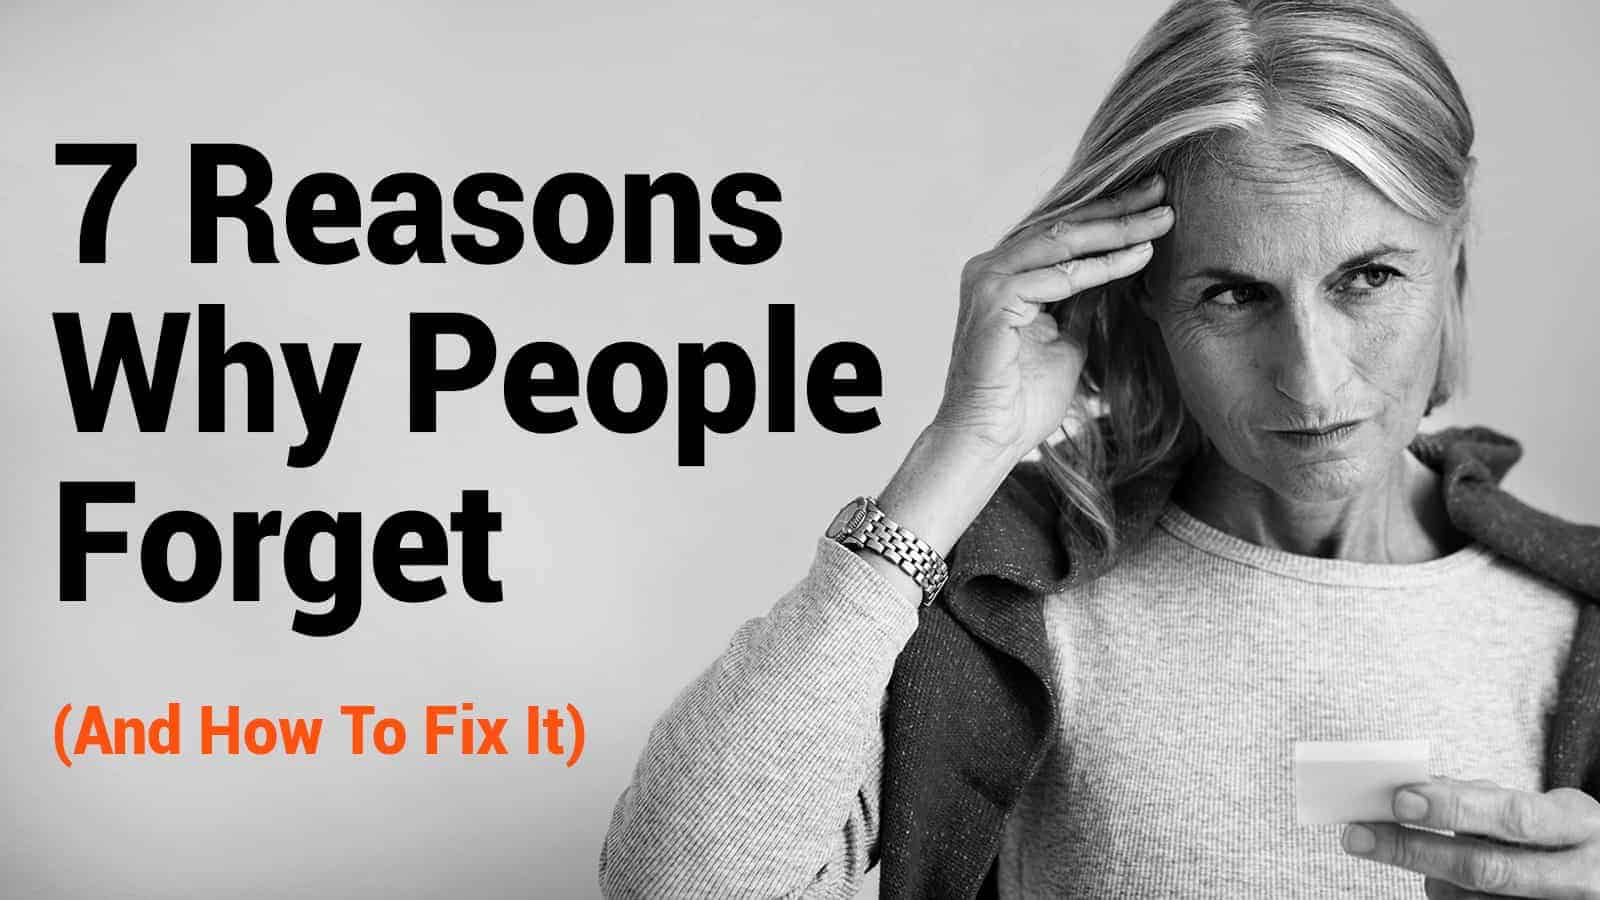 7 Reasons Why People Forget (And How To Fix It)